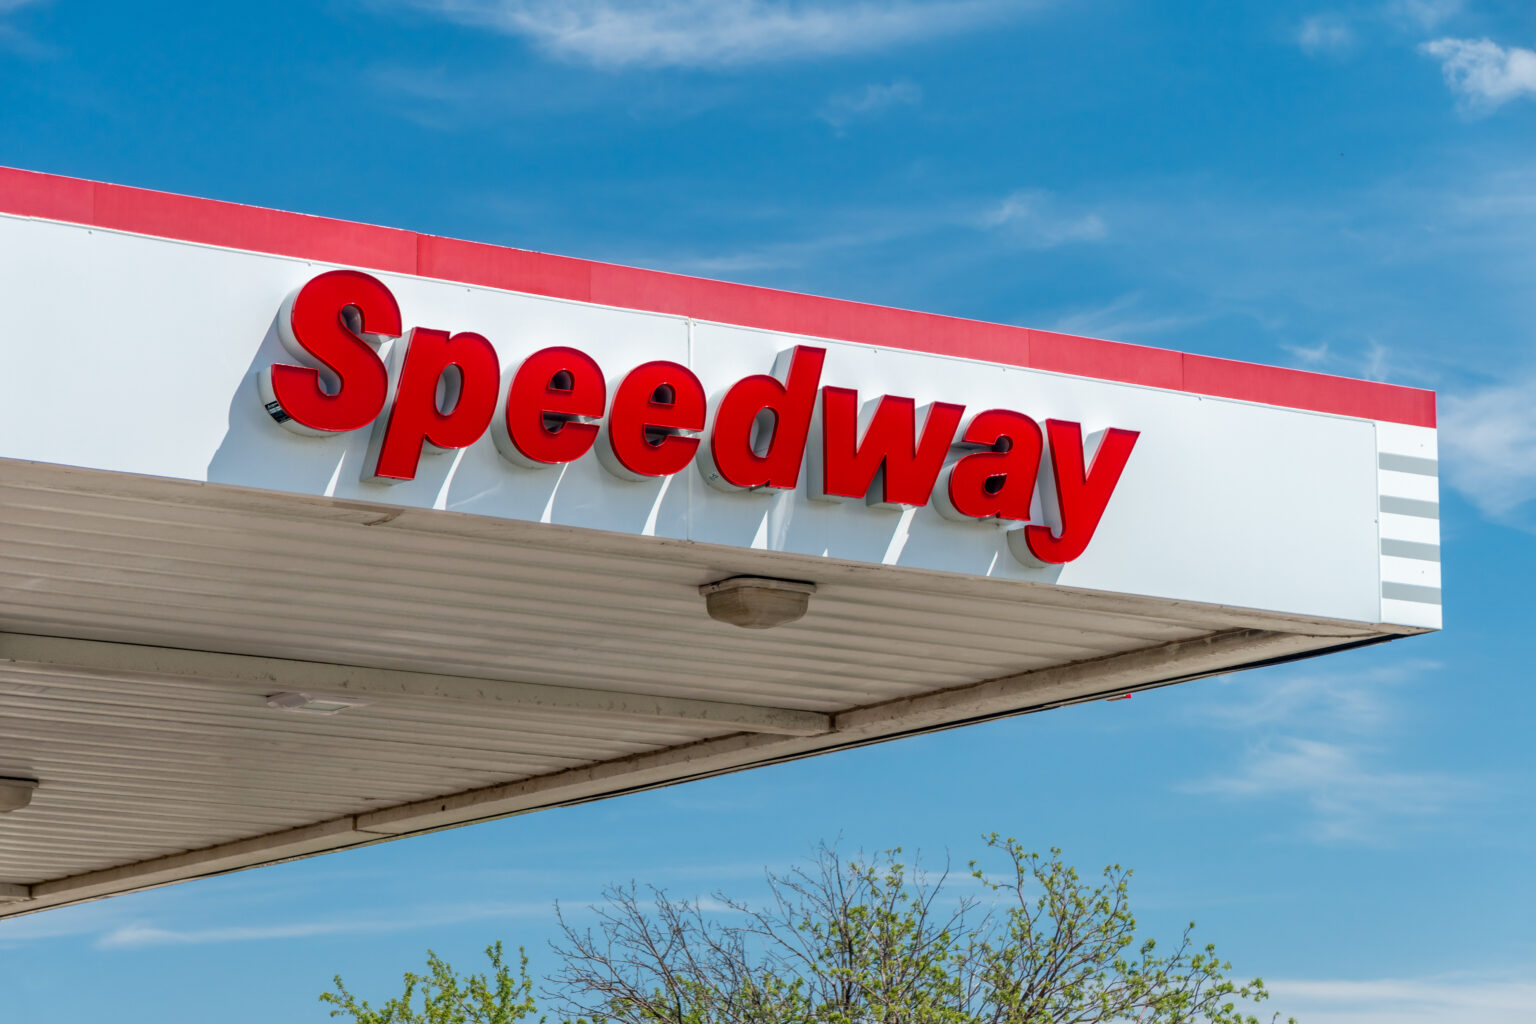 Speedway sign at one of the gas station's locations